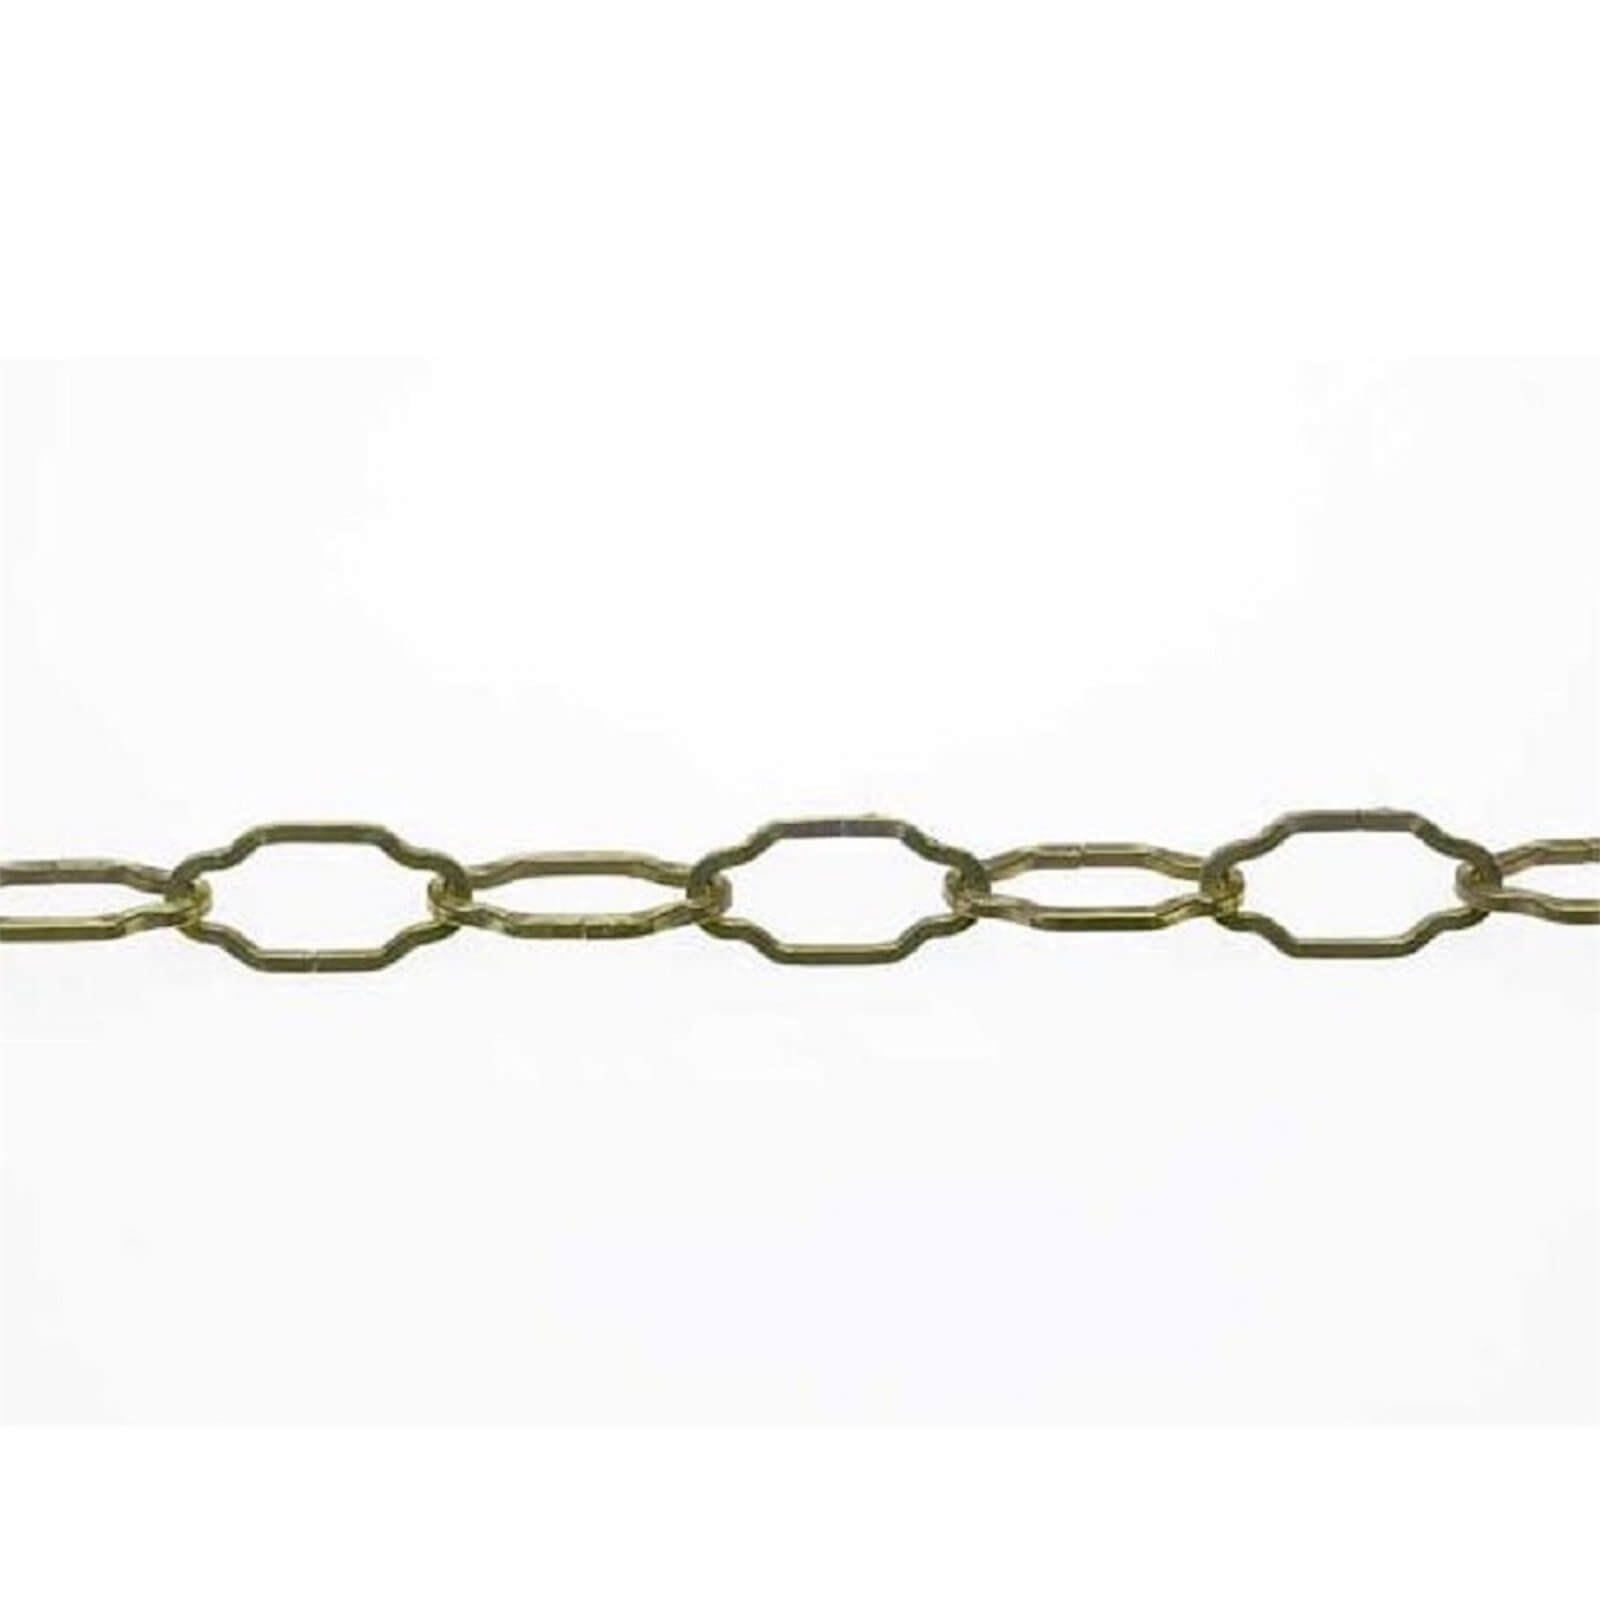 Per Metre Gothic Chain - Nickel Plated - 2.3mm x 1m